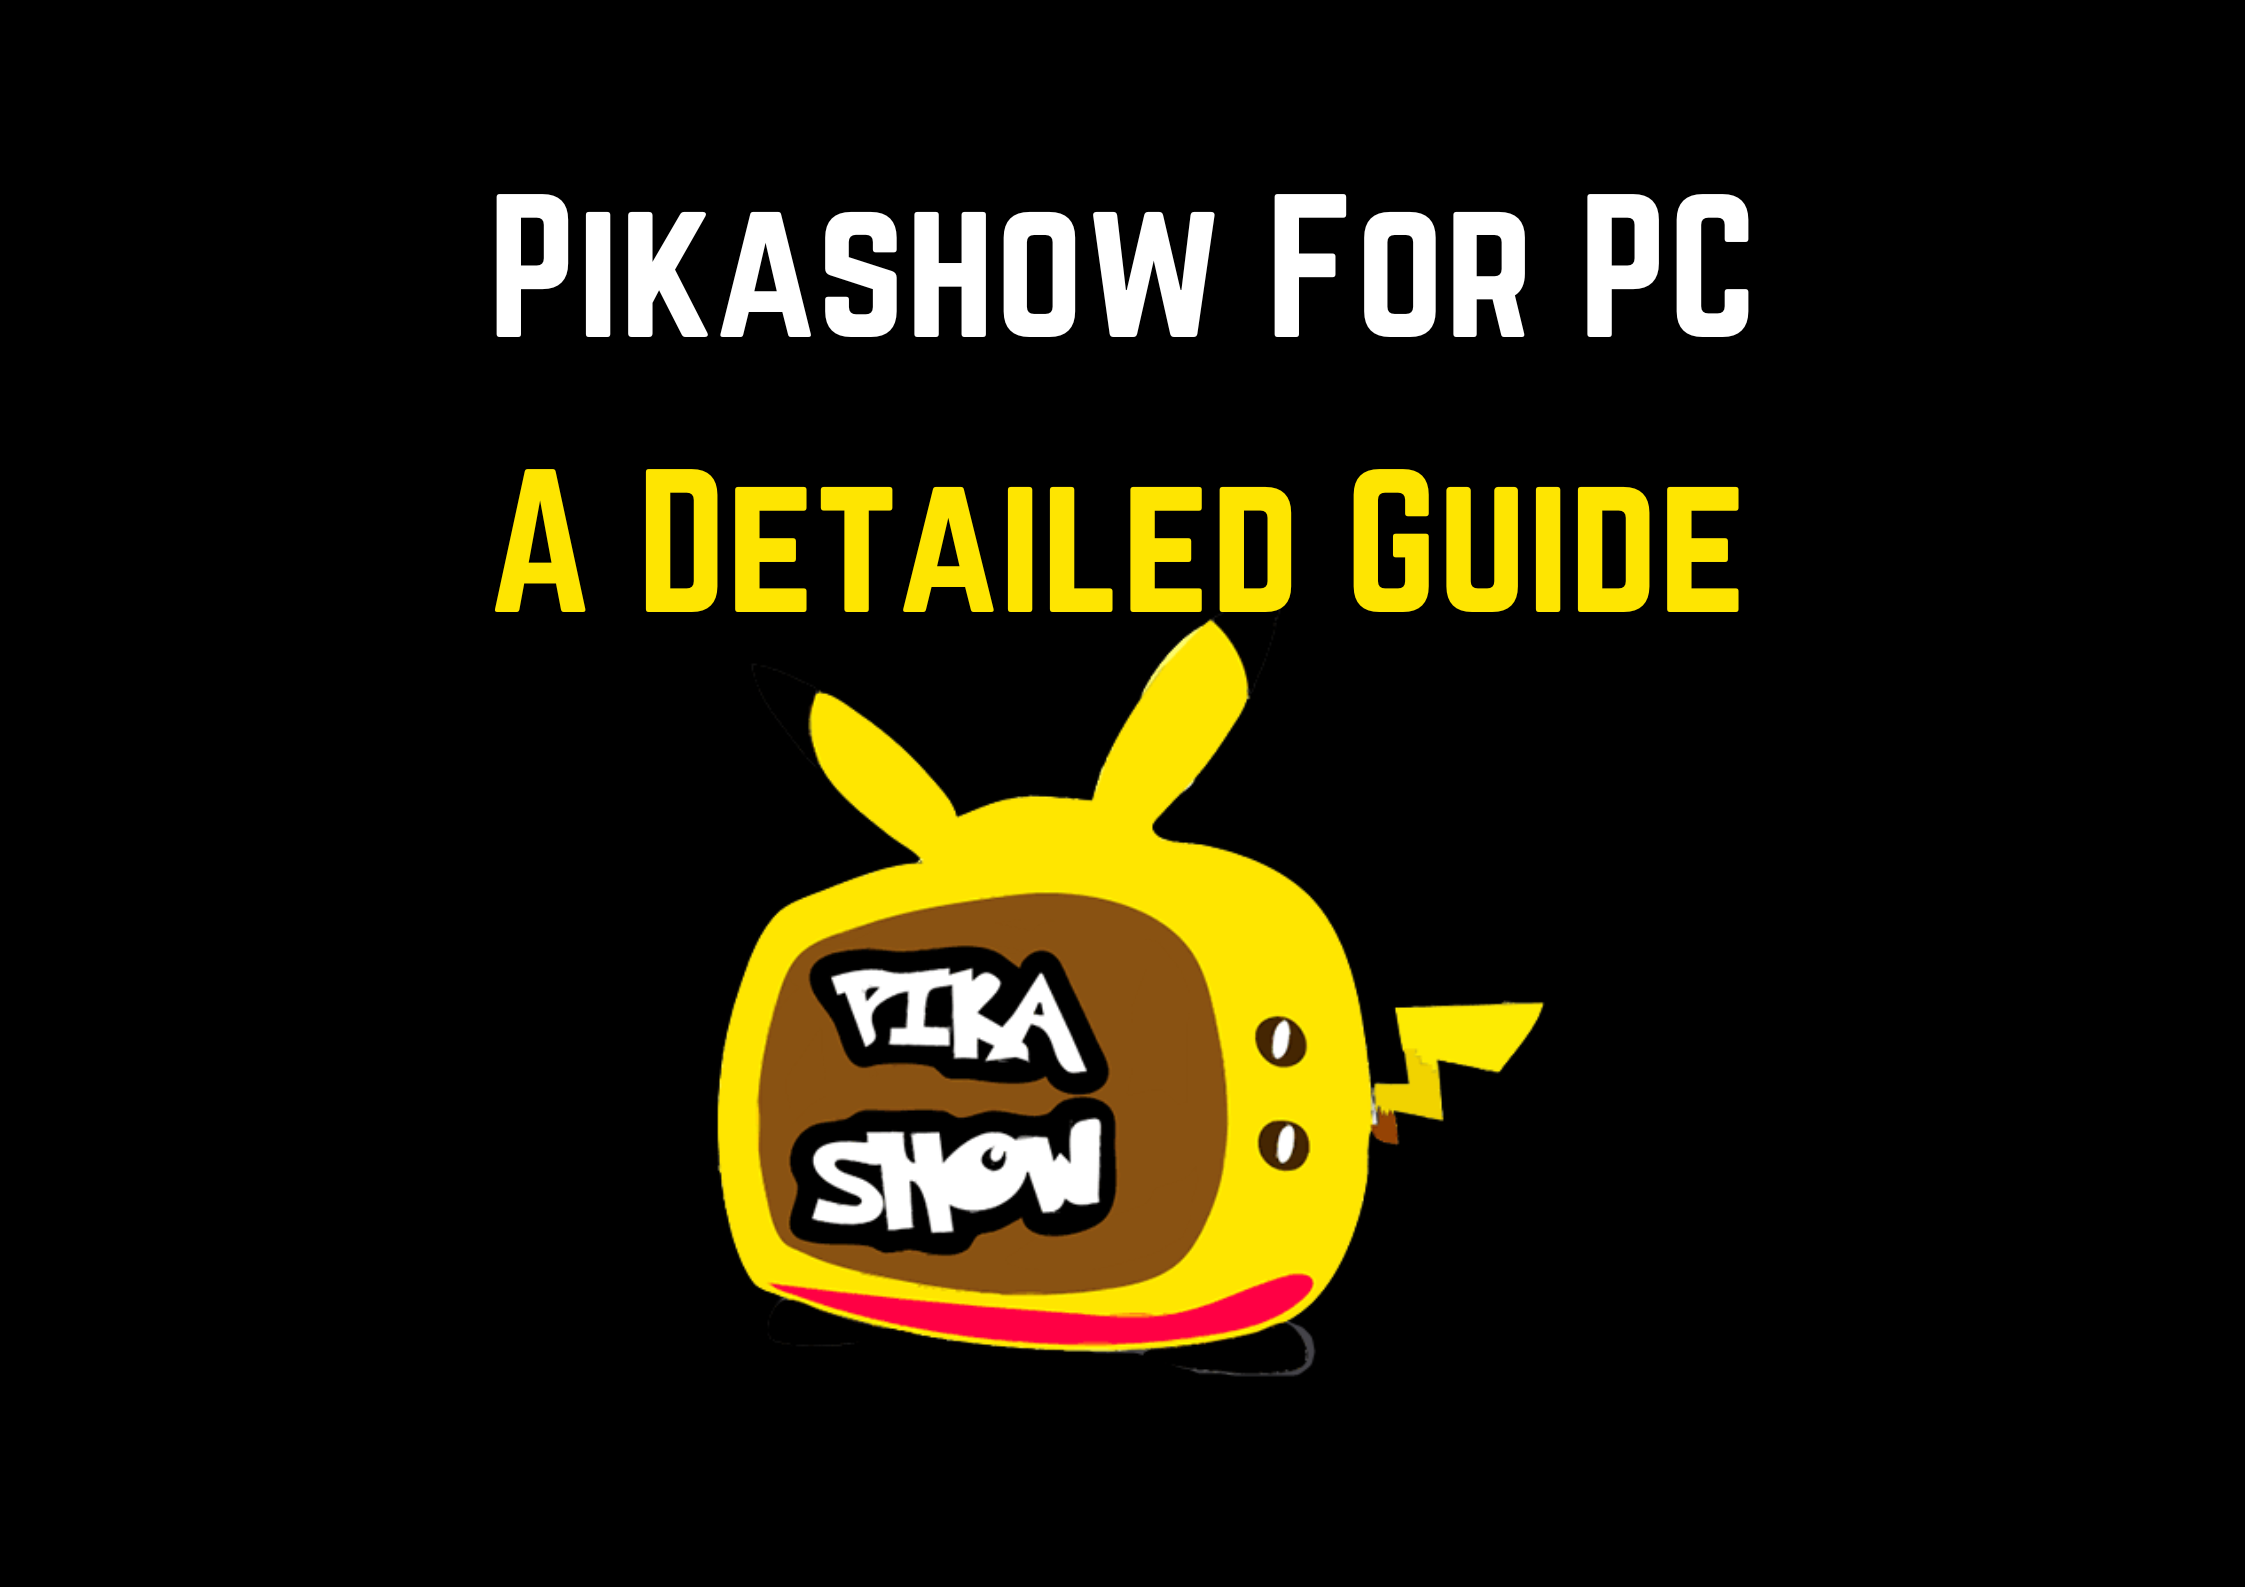 Pikashow For PC